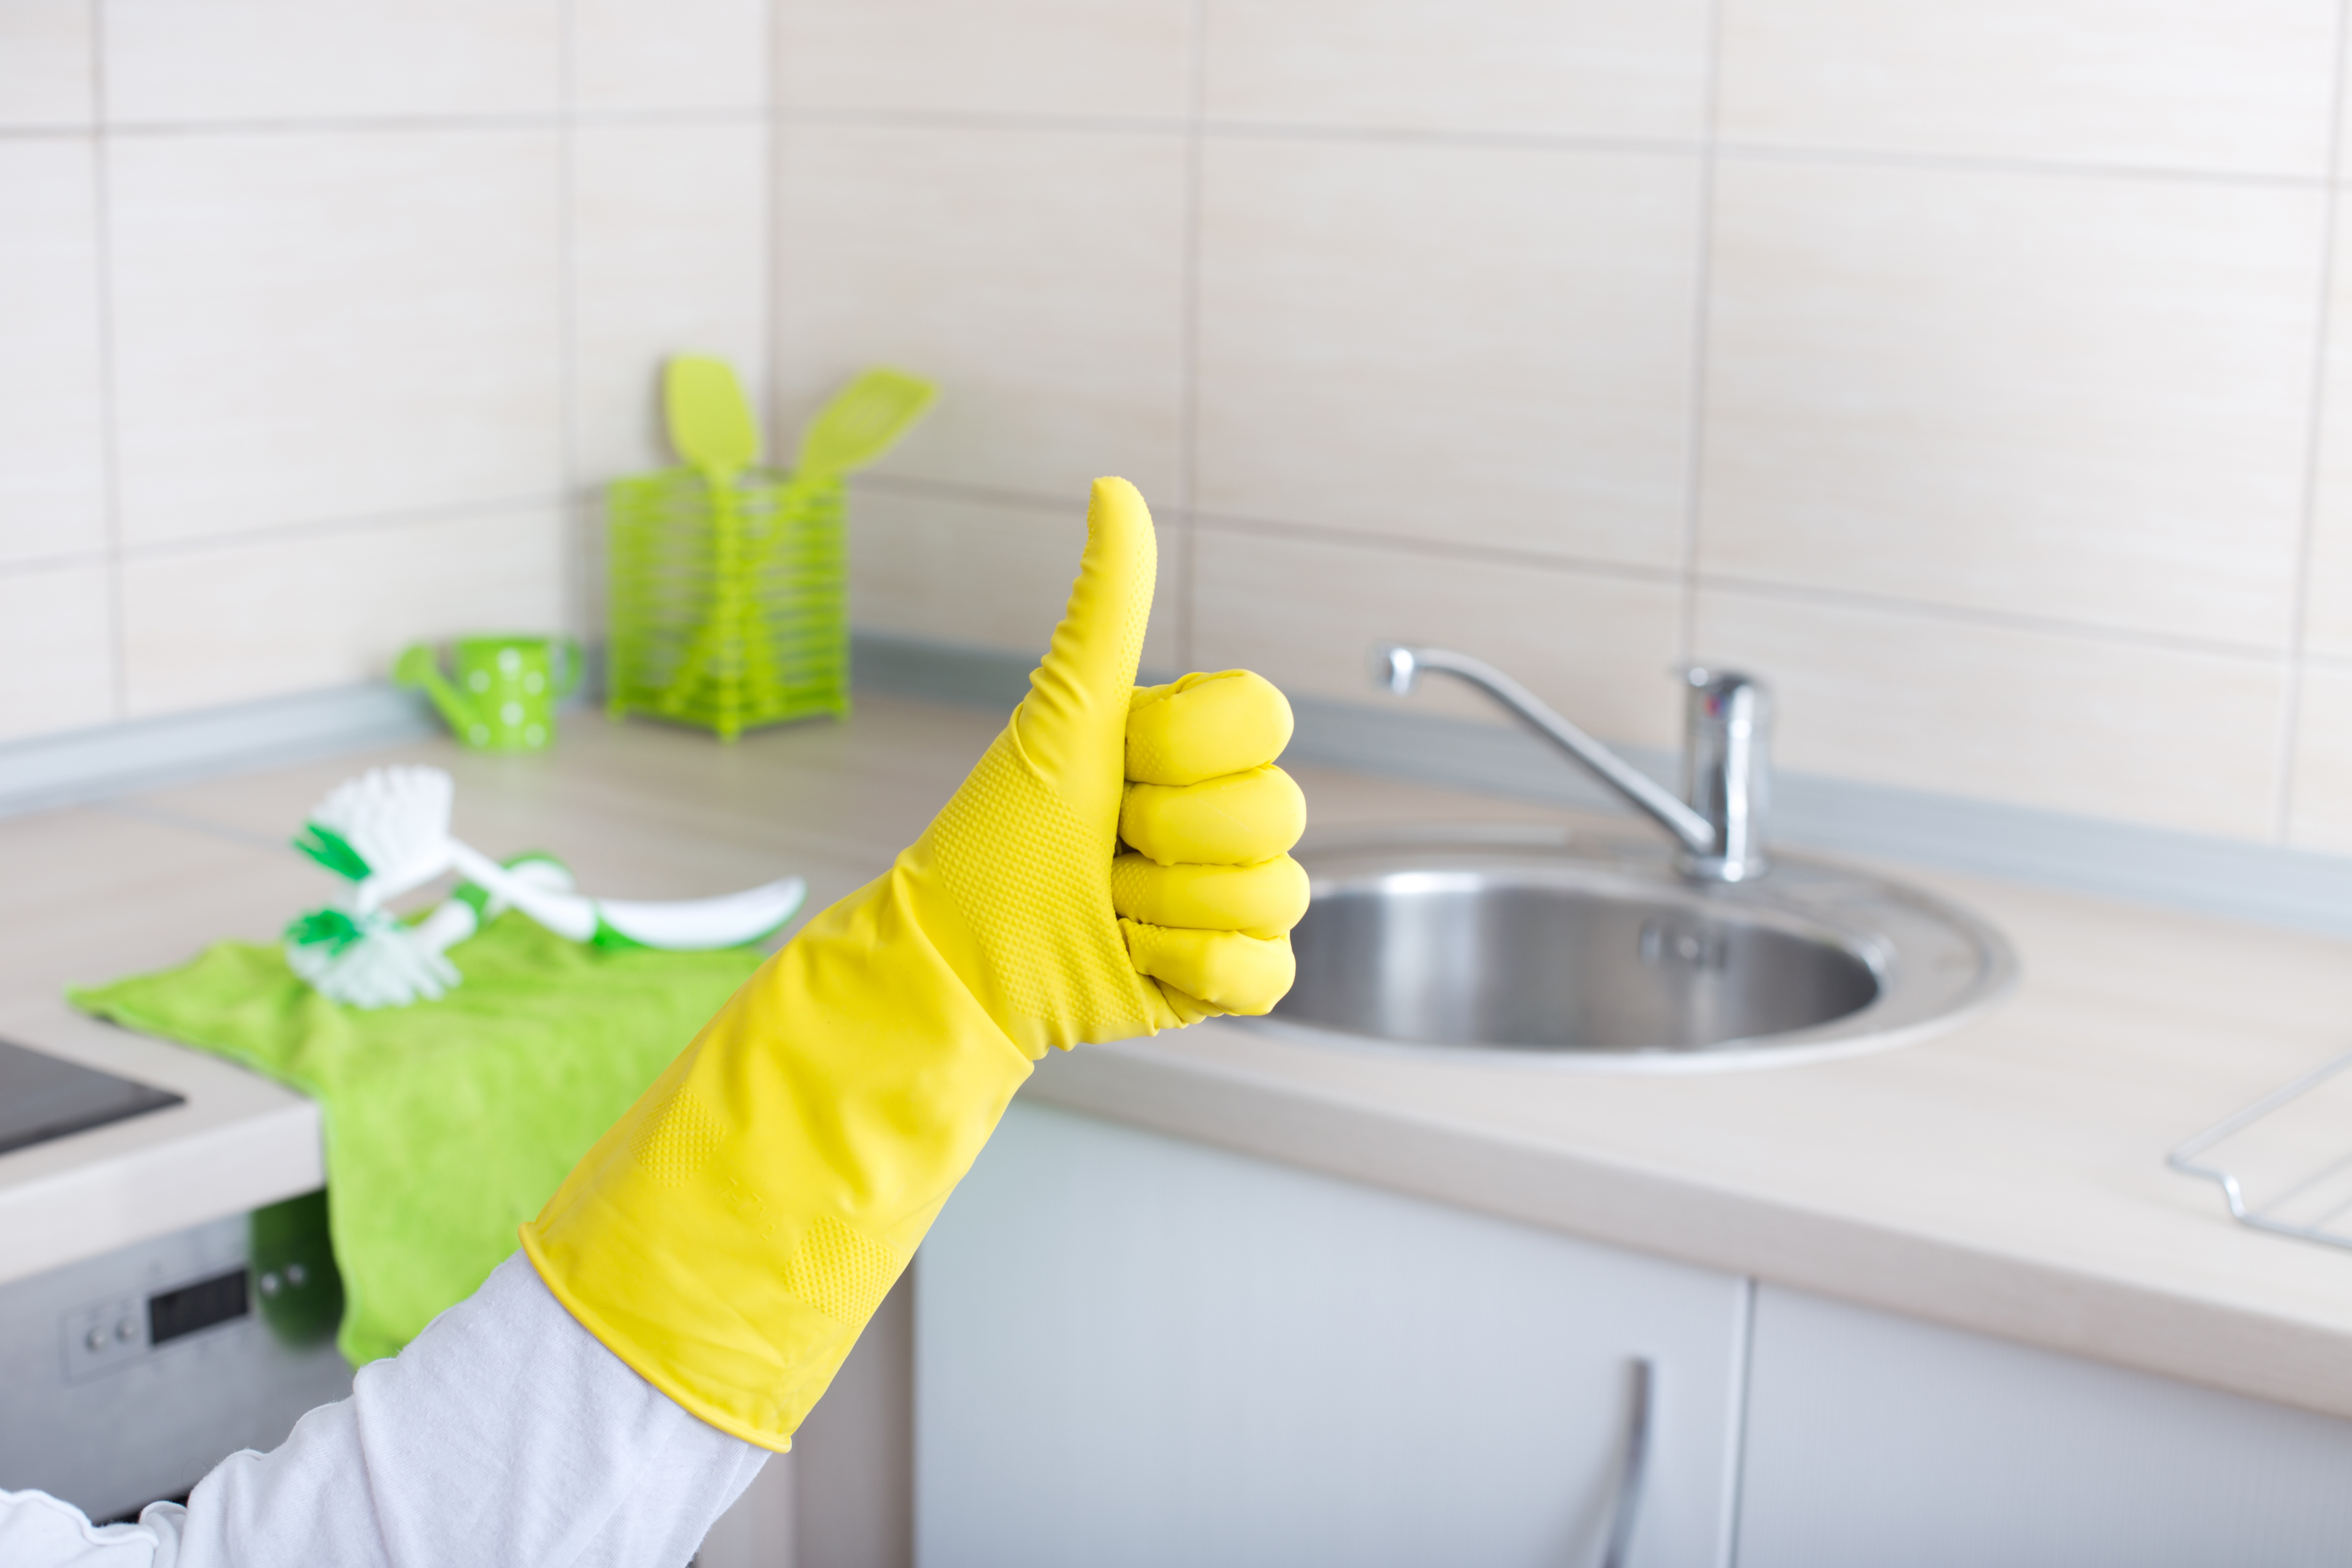 Photo by: AdobeStock/A thumbs up for a clean kitchen.